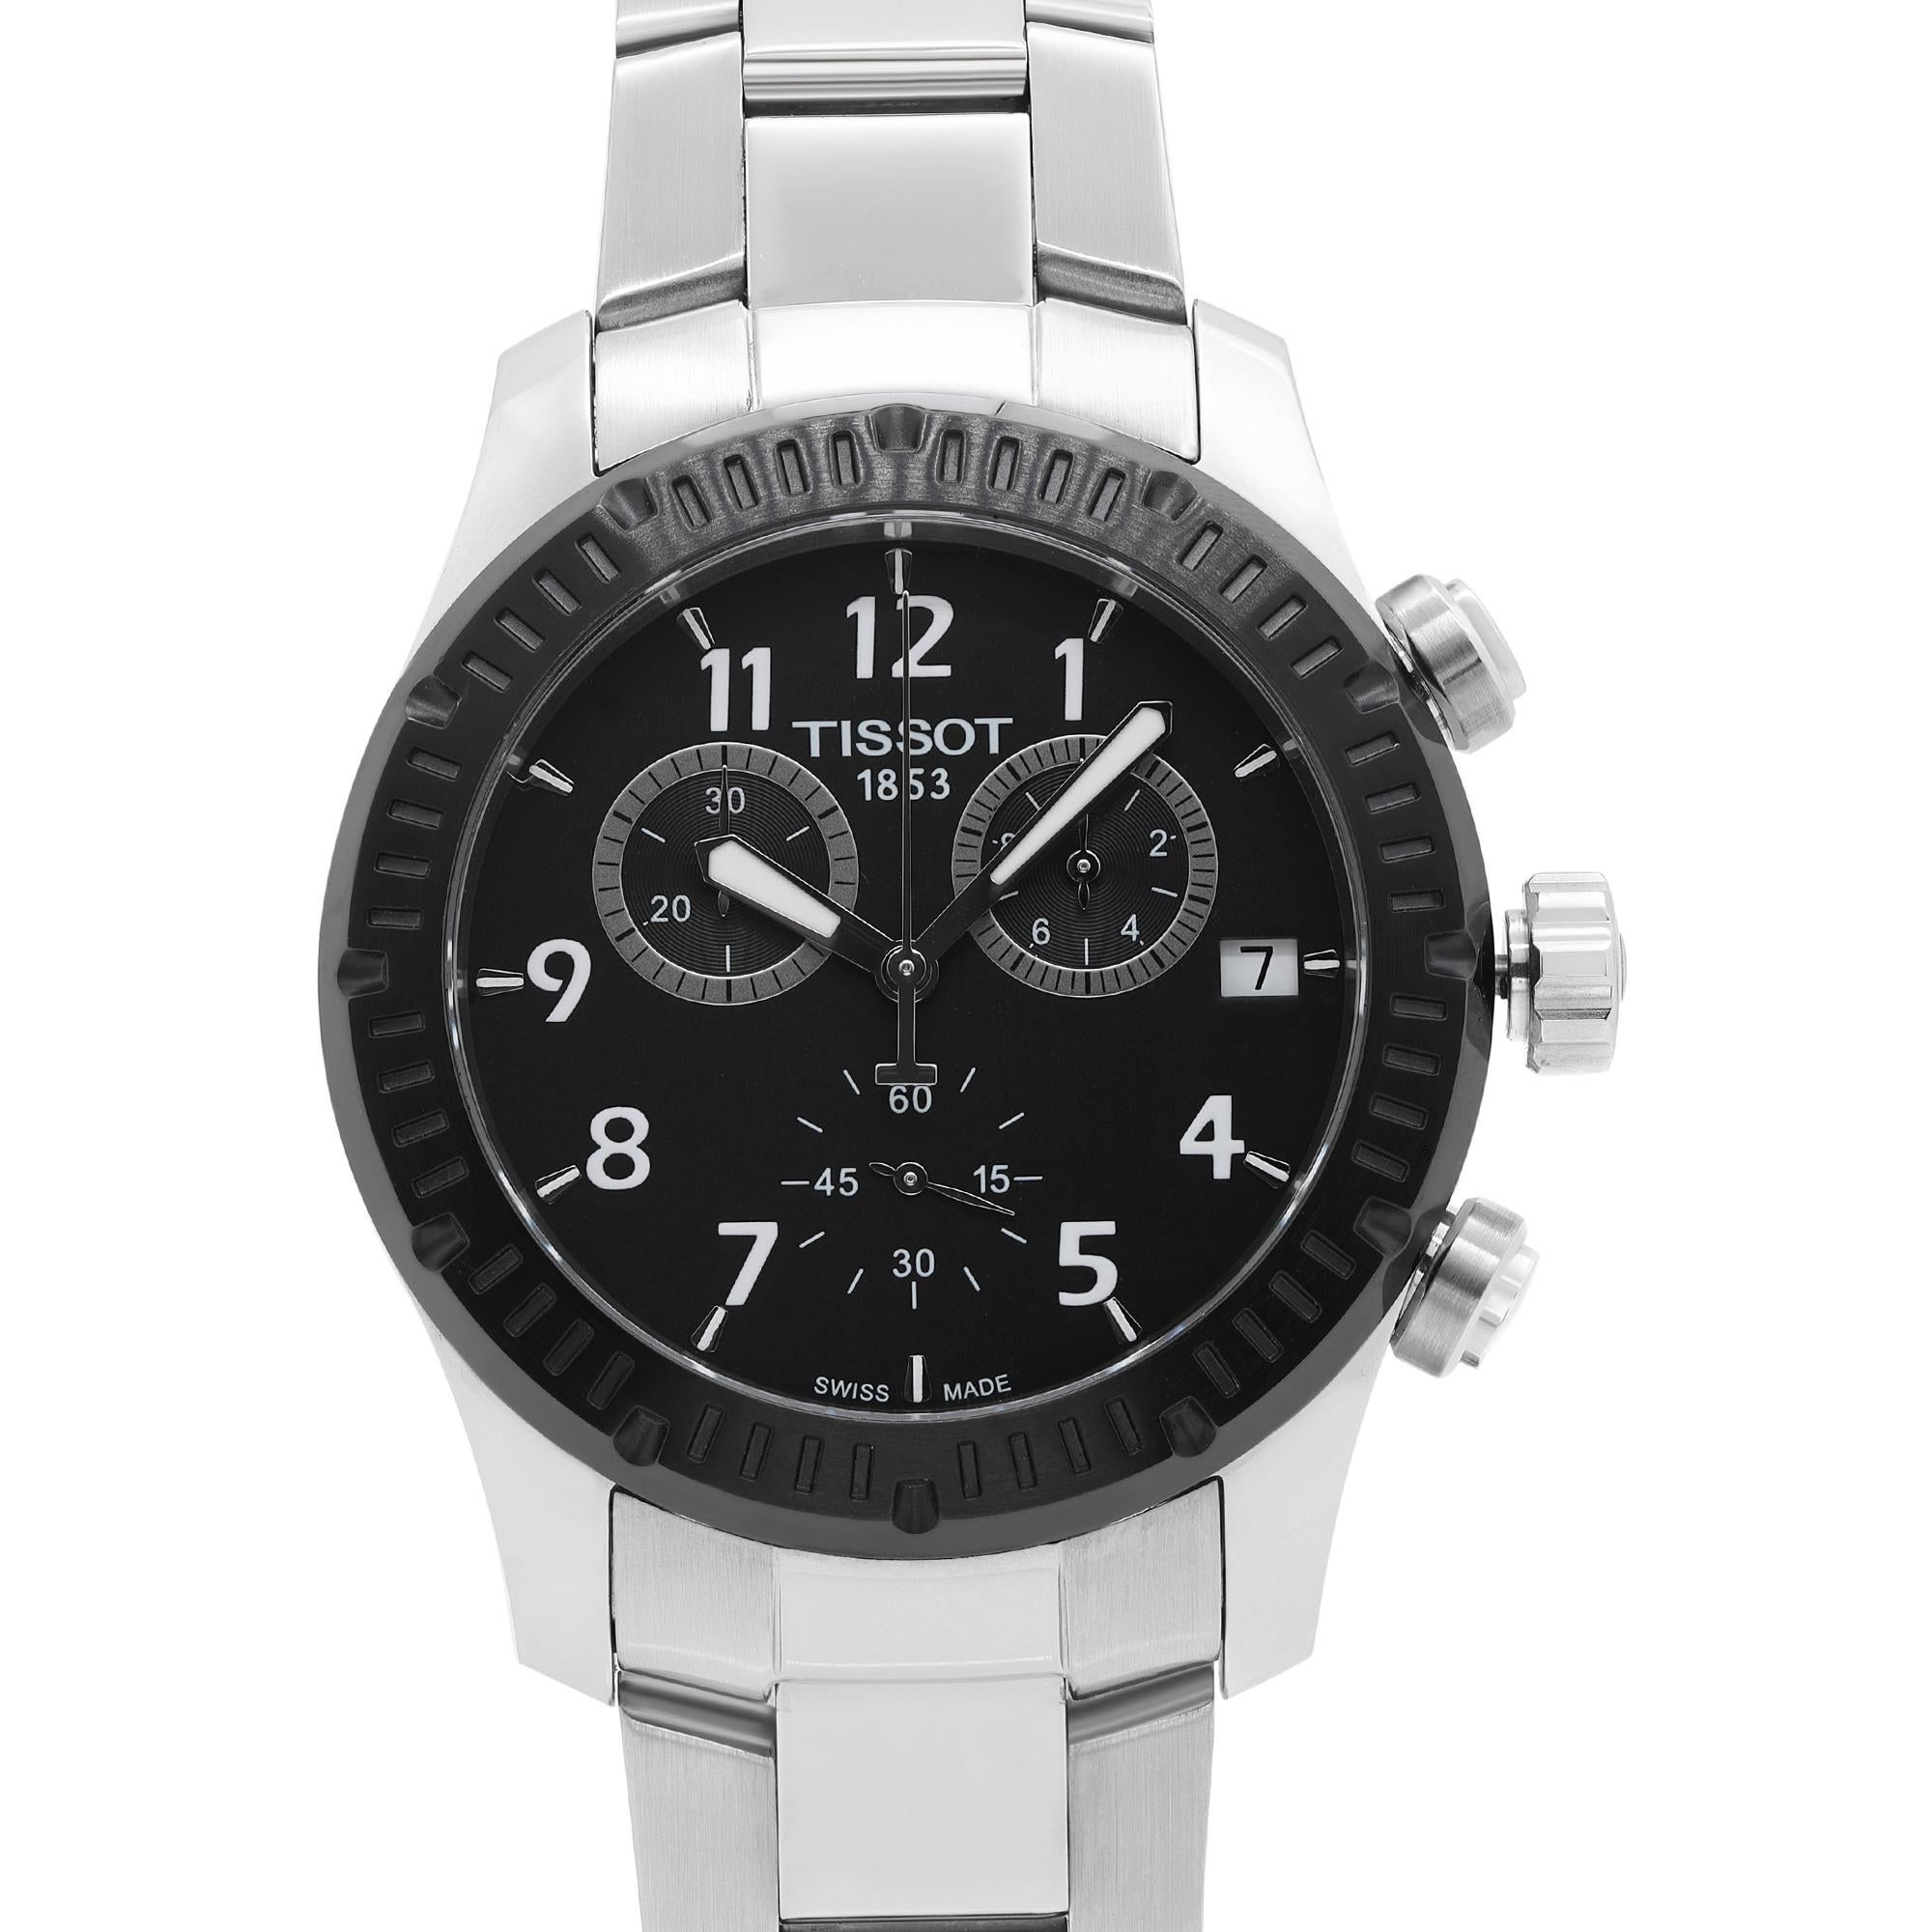 Display Model Tissot V8 Stainless Steel Chronograph Black Dial Men Quartz Watch T039.417.21.057.00.  Original Box and Papers are Included. Covered by 1-year Chronostore Warranty.

Brand: Tissot  Type: Wristwatch  Department: Men  Model Number: